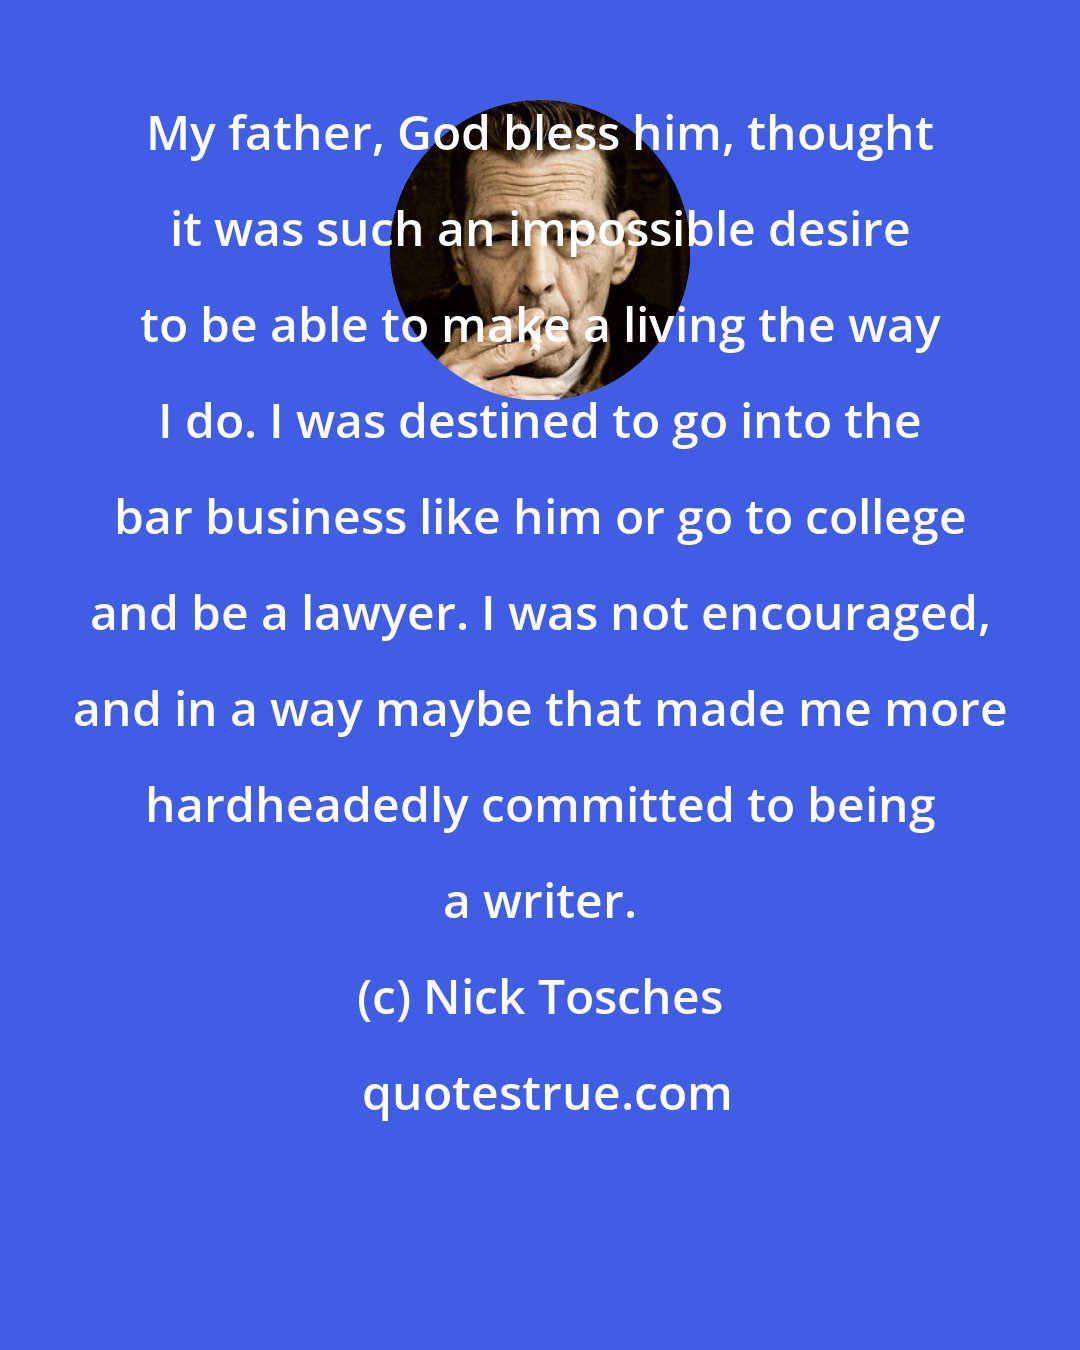 Nick Tosches: My father, God bless him, thought it was such an impossible desire to be able to make a living the way I do. I was destined to go into the bar business like him or go to college and be a lawyer. I was not encouraged, and in a way maybe that made me more hardheadedly committed to being a writer.